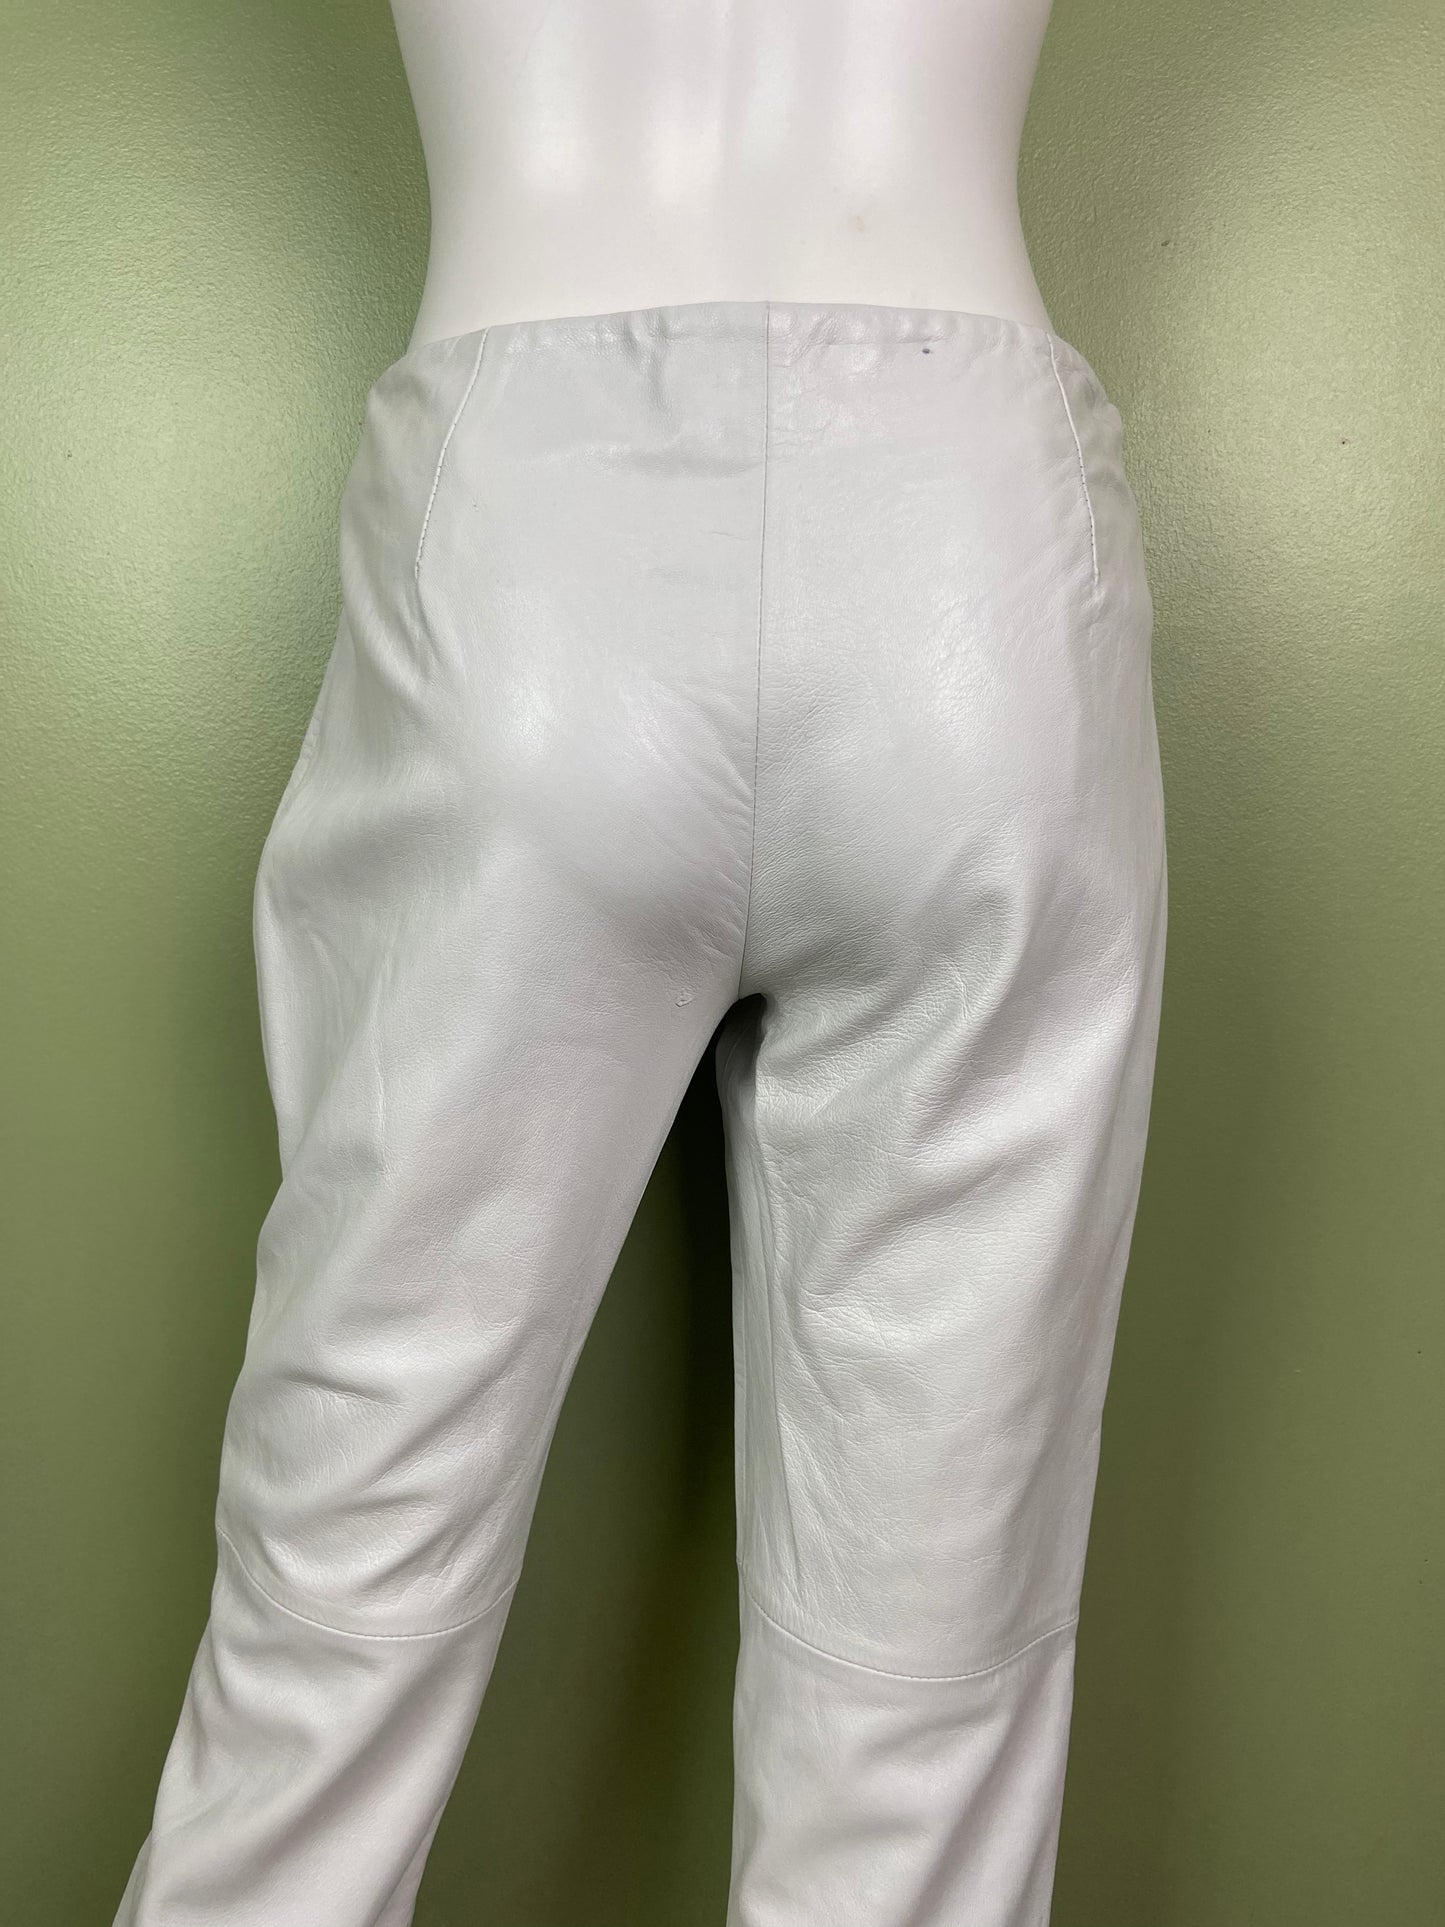 Vintage White Lambskin Leather Pink Graphic Print Pants